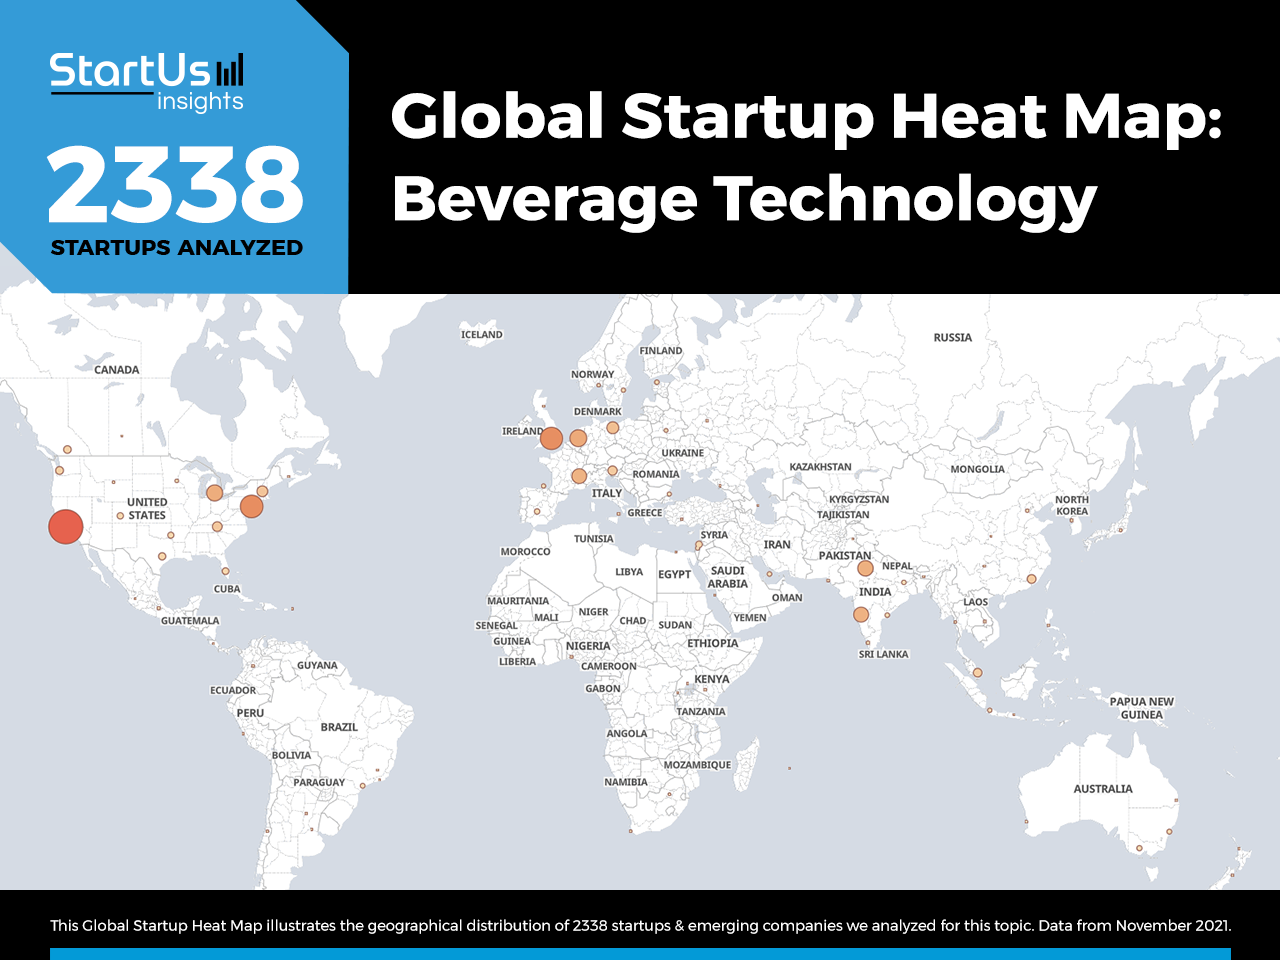 Beverage-Technology-Trends-Research-Startups-Heat-Map-StartUs-Insights-noresize